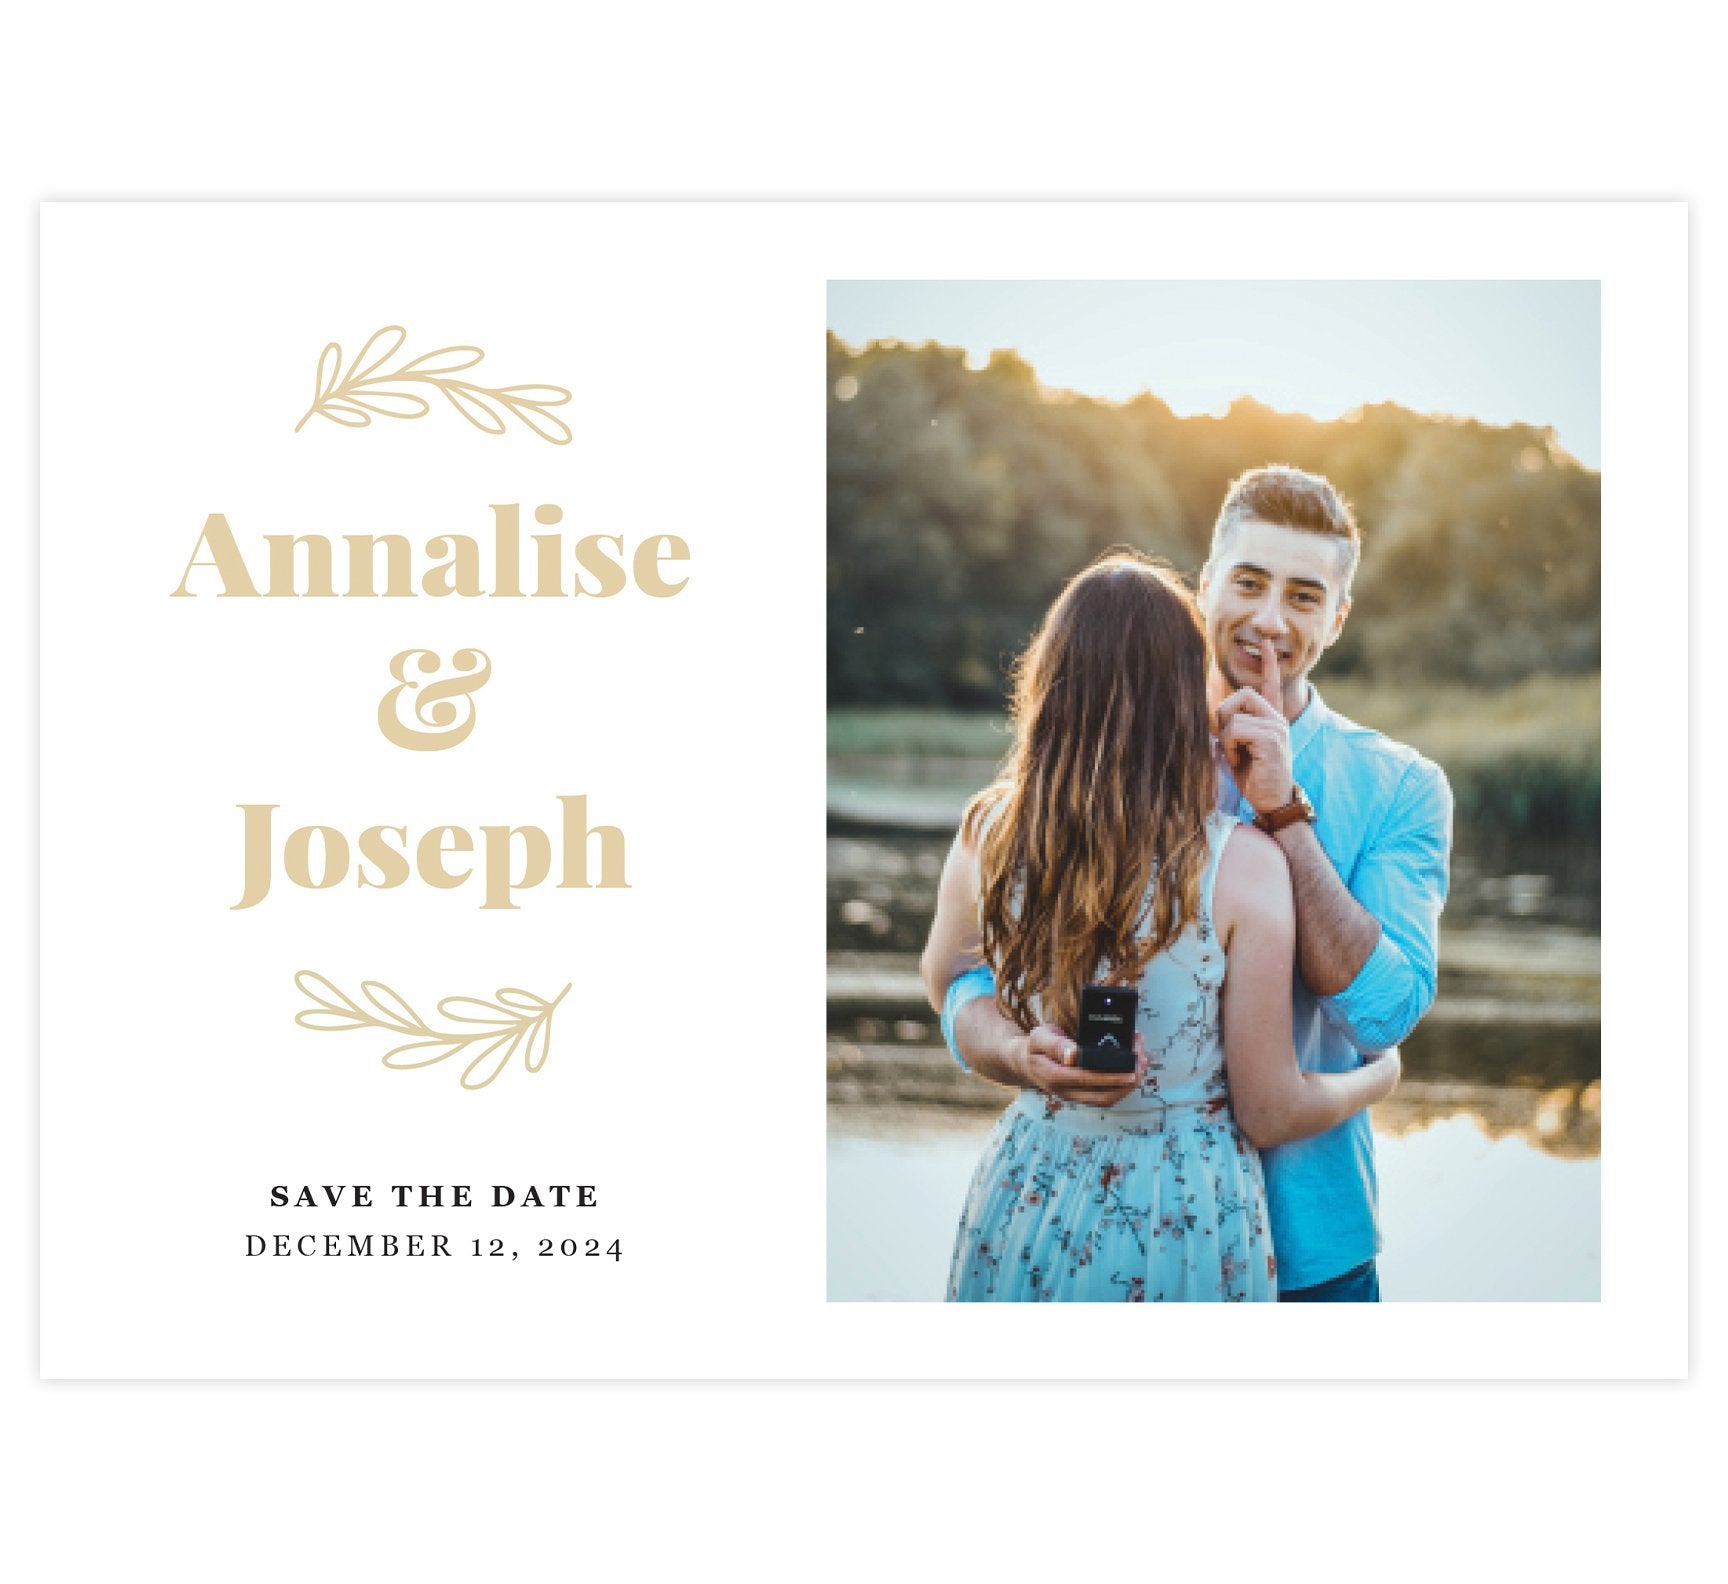 Stunning Gold Save the Date Card with 1 or 4 image spots